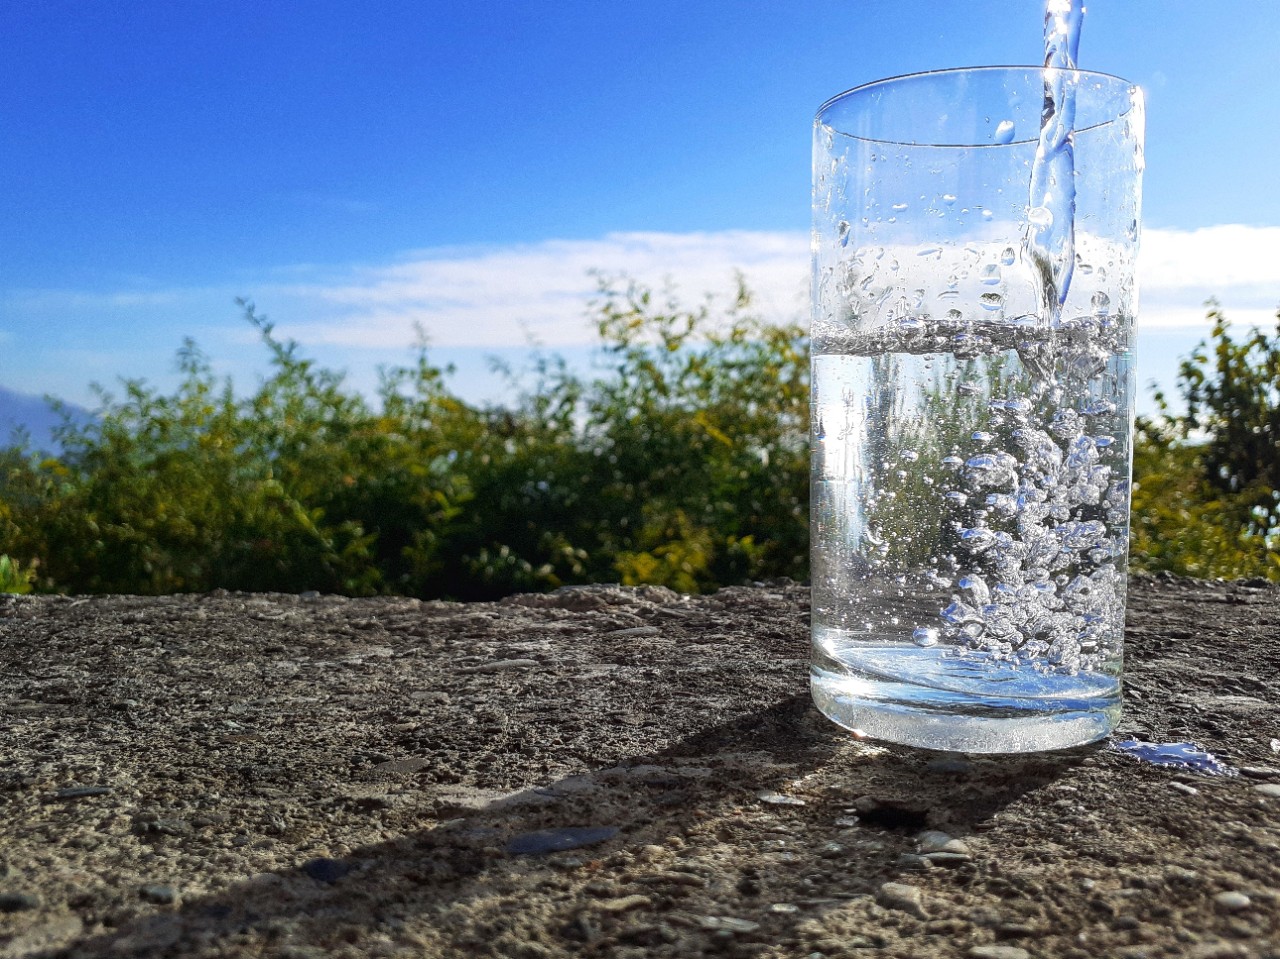 This is a picture of clean water pouring into a transparent glass taken in a natural background in a beautiful day and sunshine.